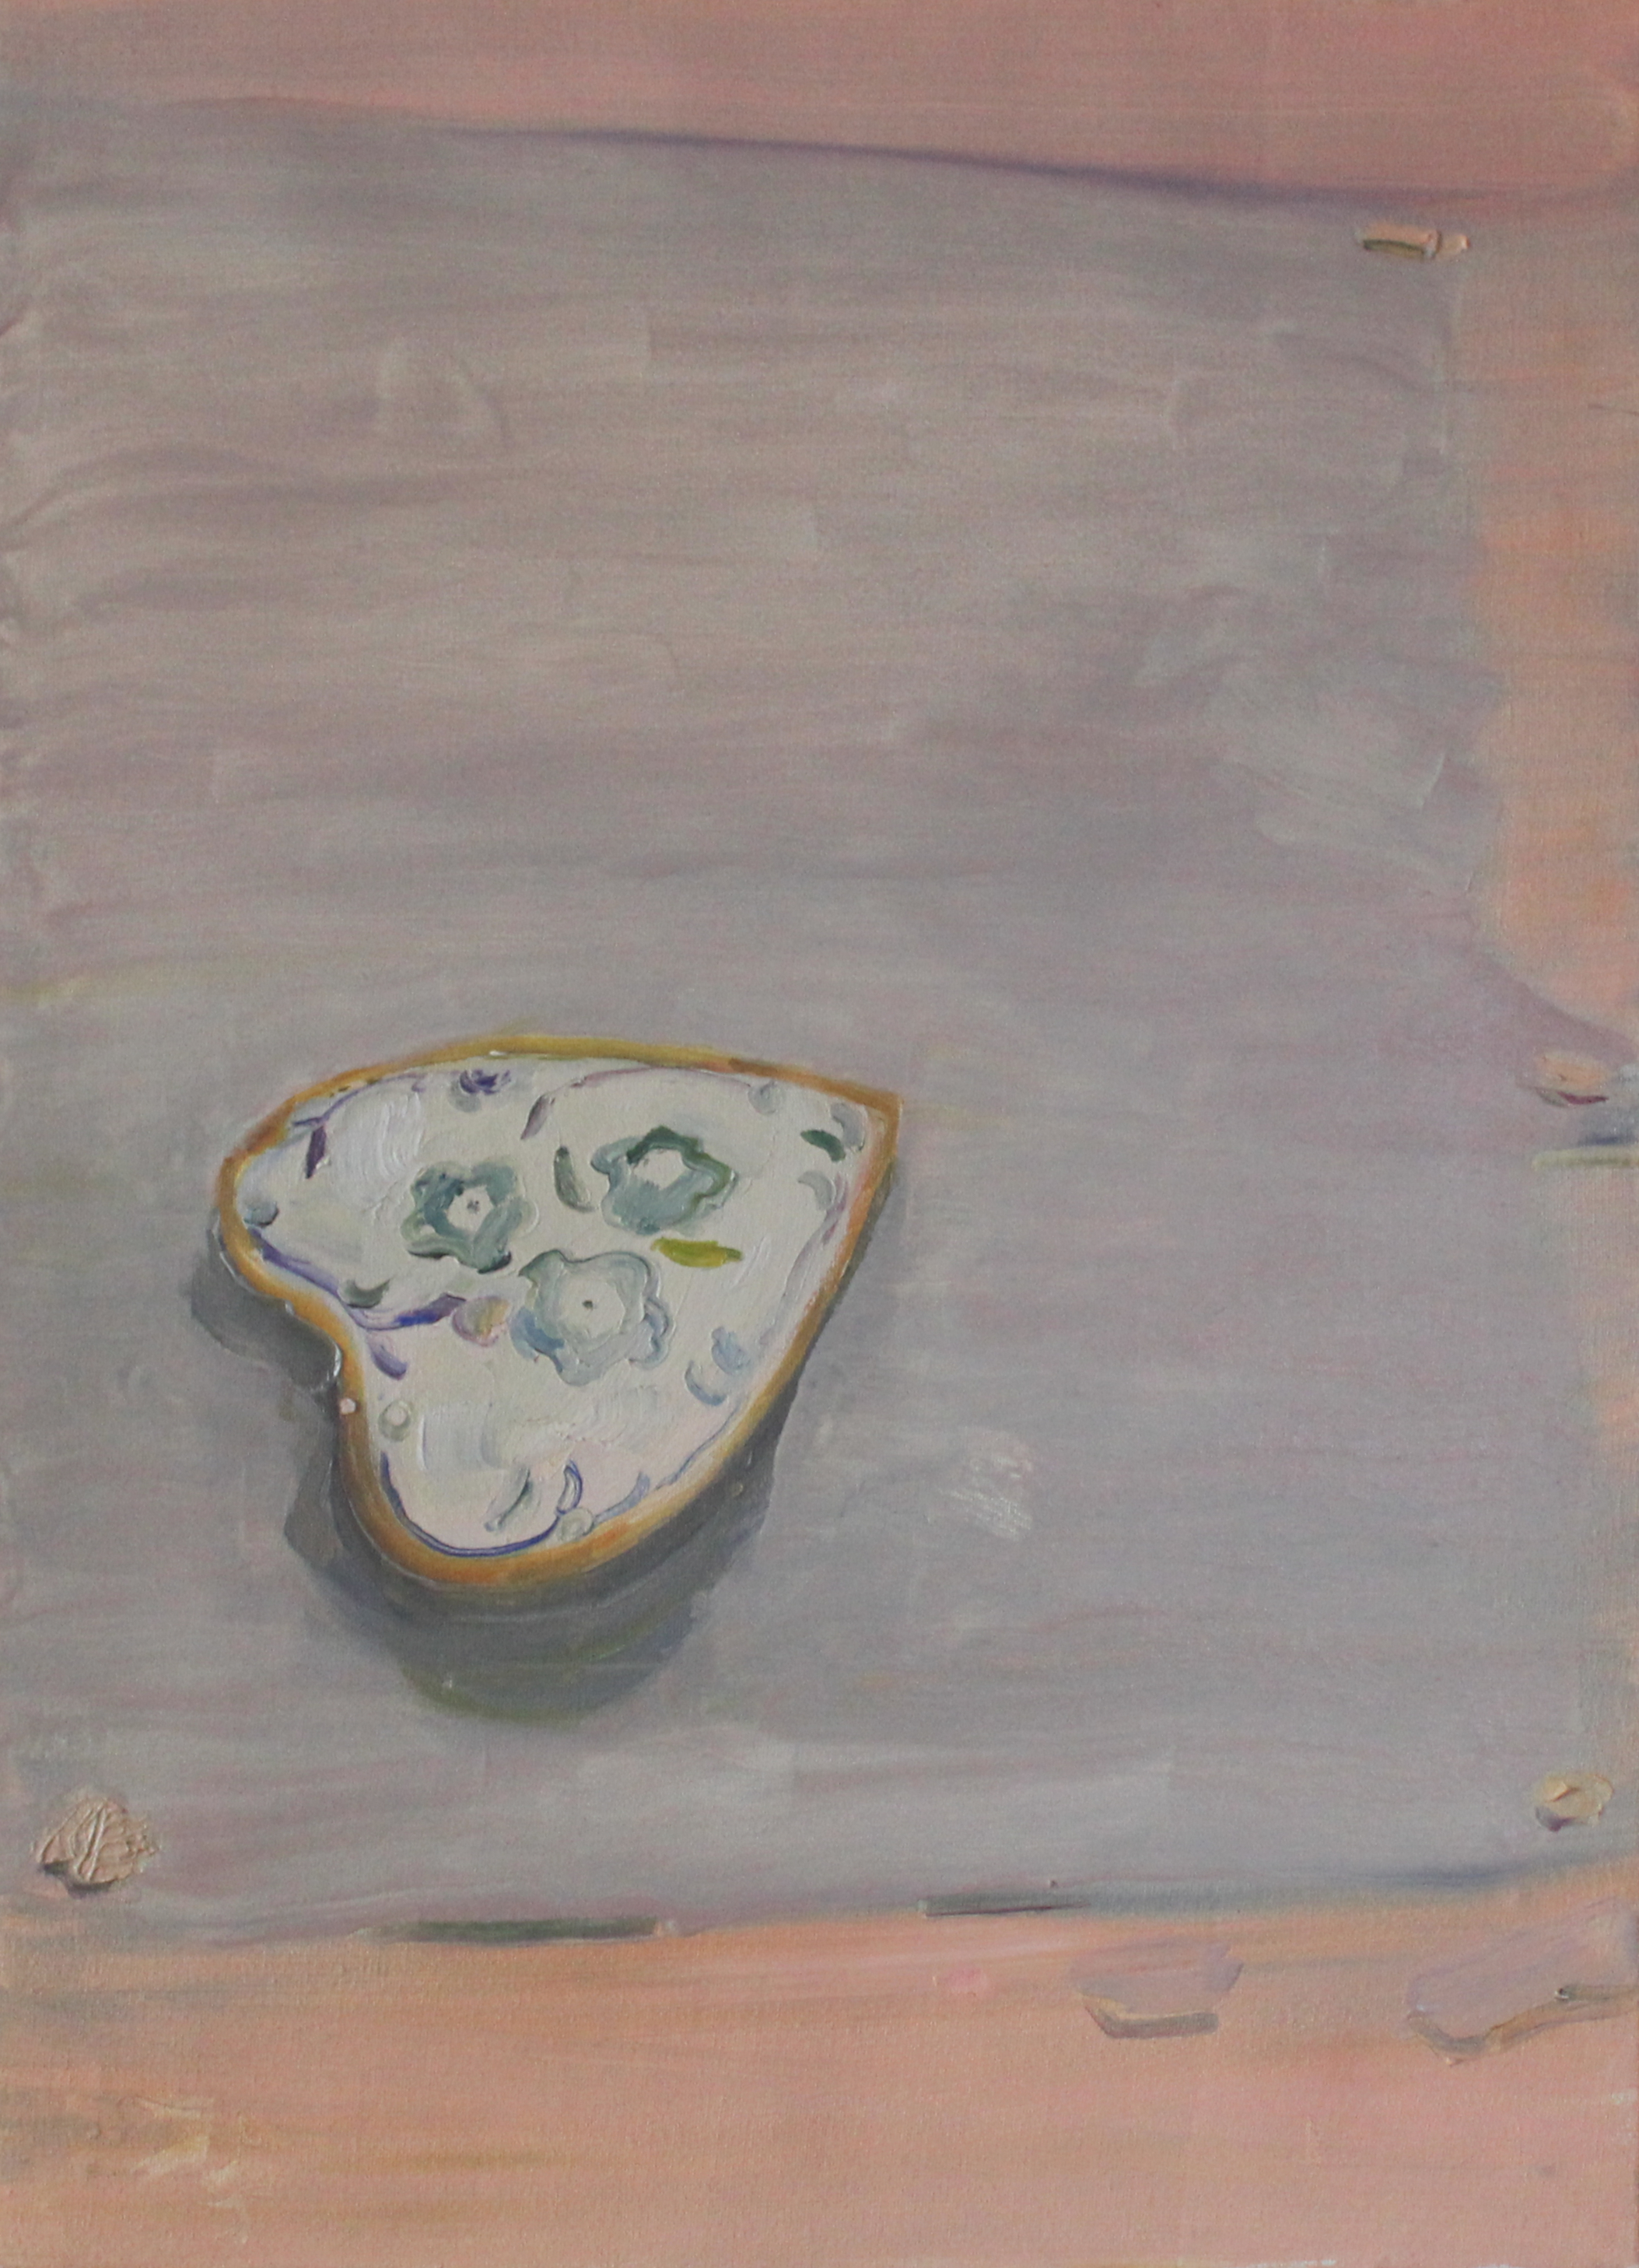 Heart Shaped Dish, Oil on Canvas 2012